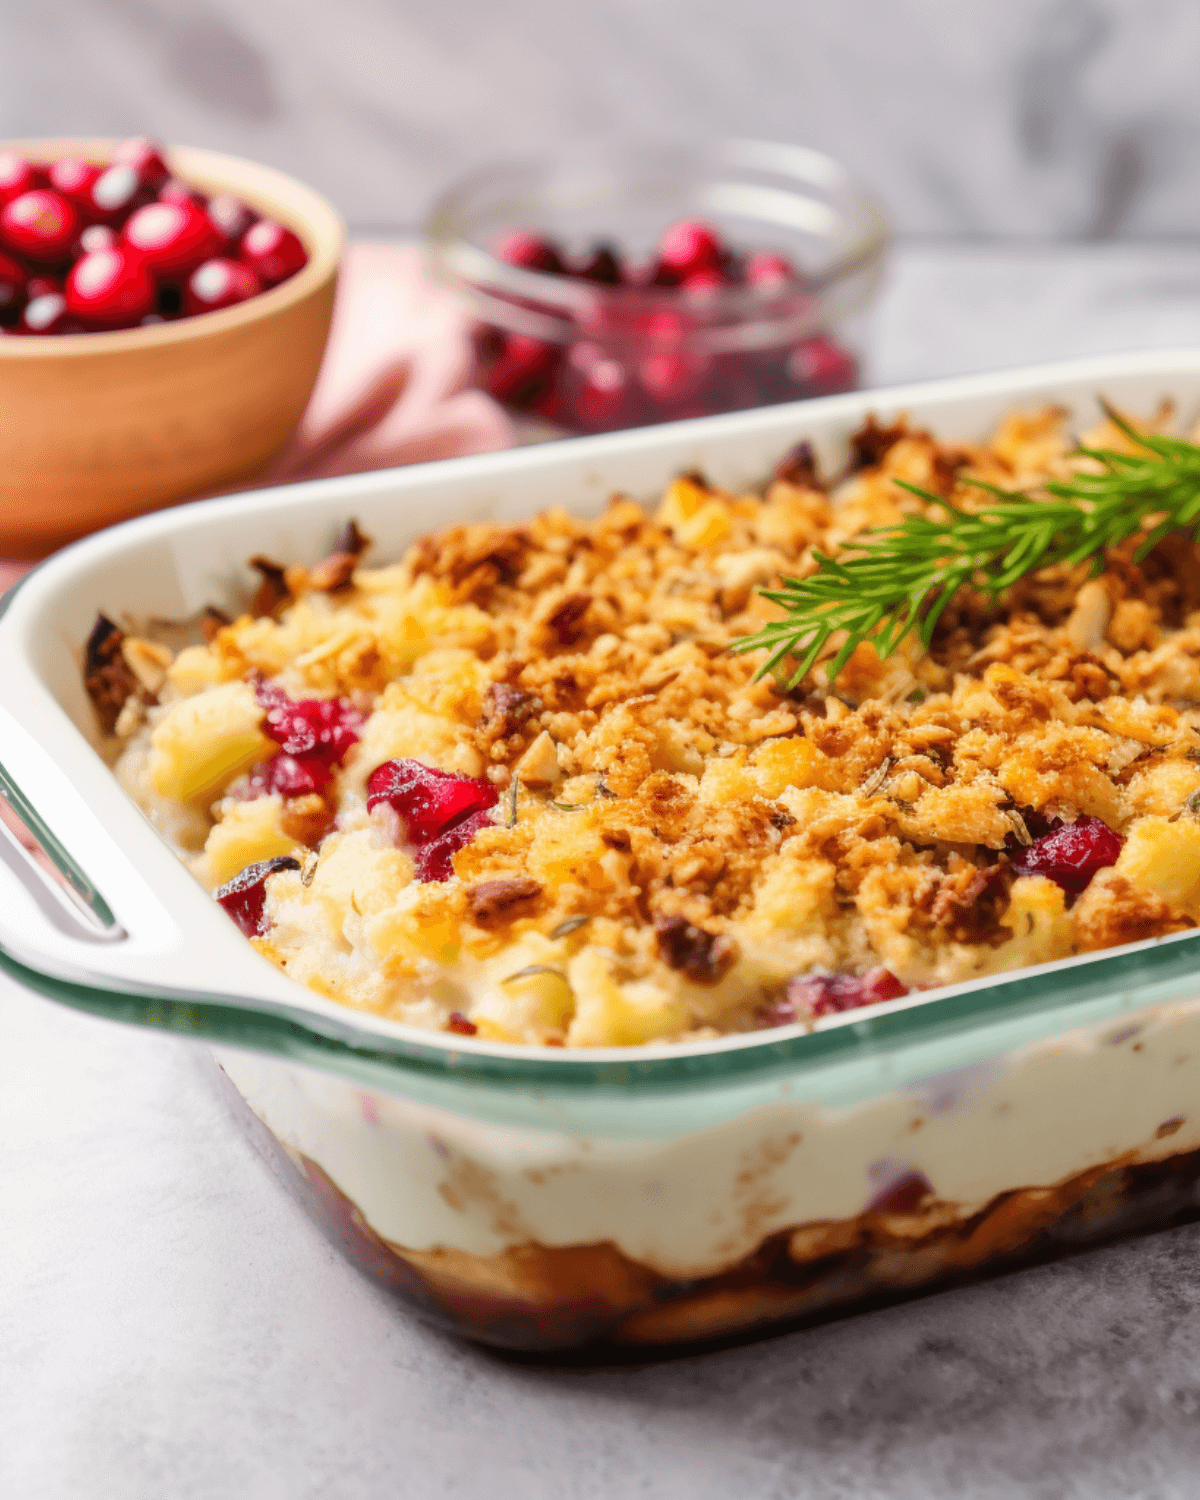 Leftover Thanksgiving casserole in a baking dish with cranberries in the background.  